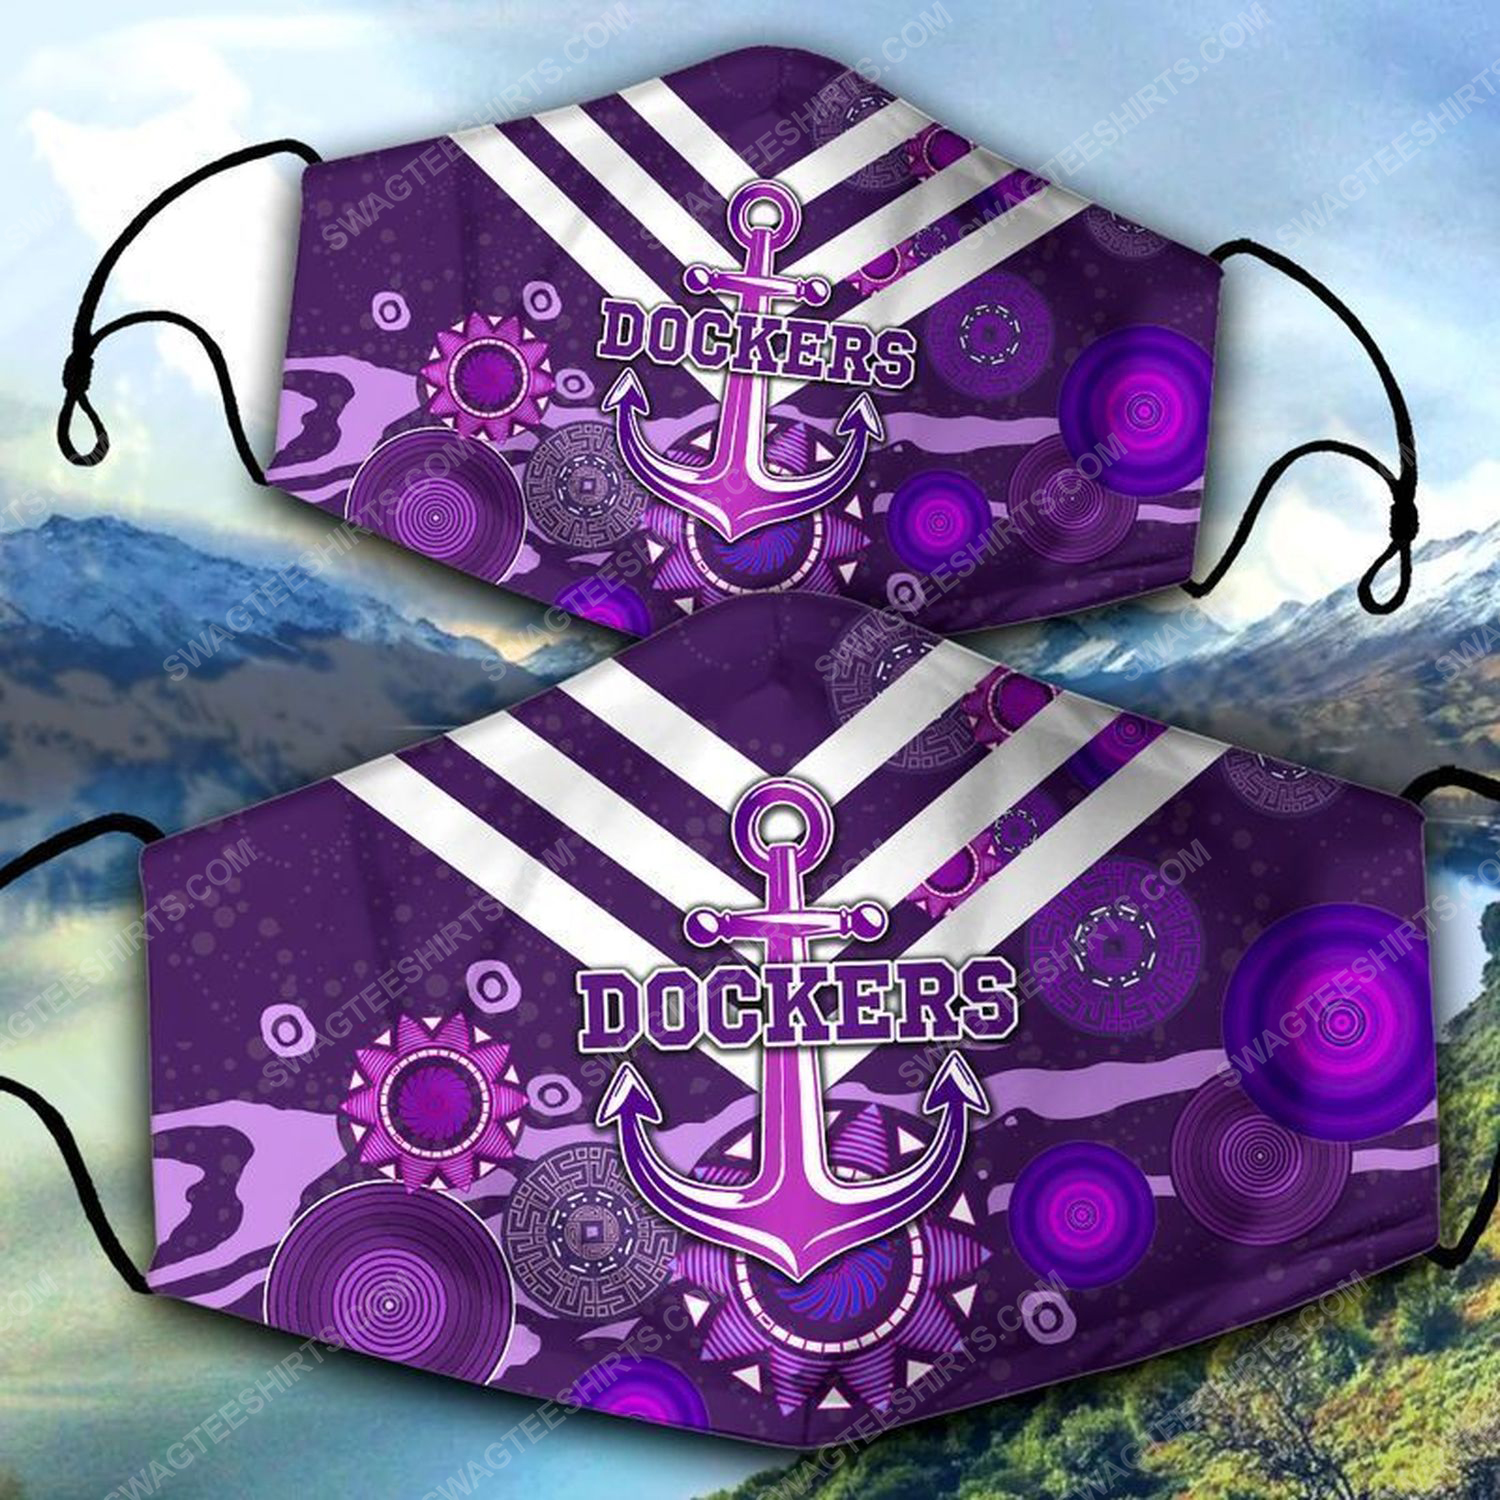 [special edition] Fremantle dockers the fremantle football club face mask – maria